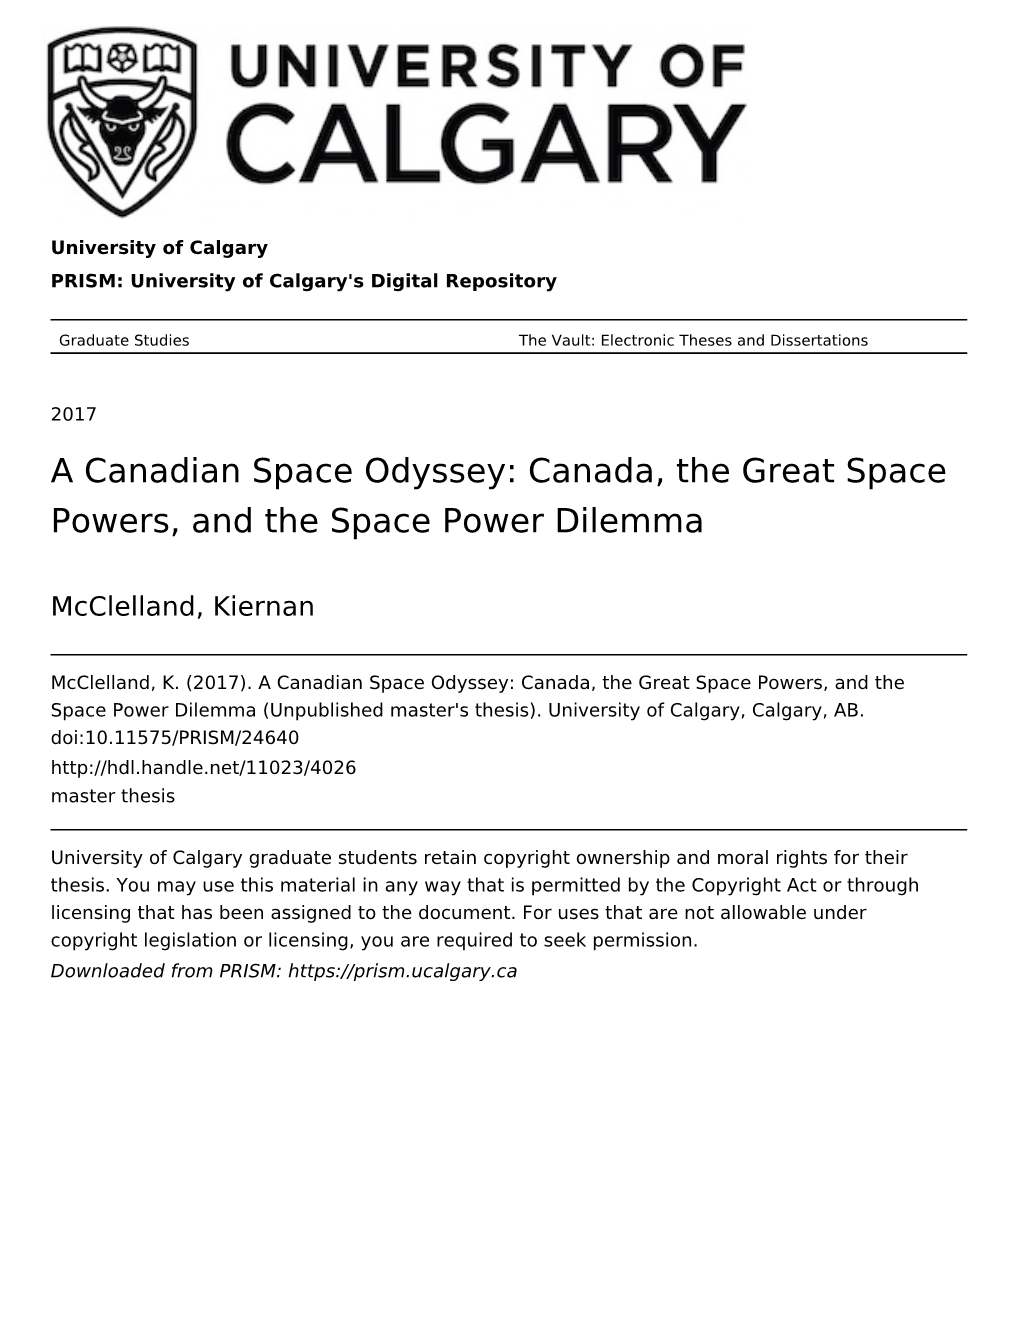 A Canadian Space Odyssey: Canada, the Great Space Powers, and the Space Power Dilemma